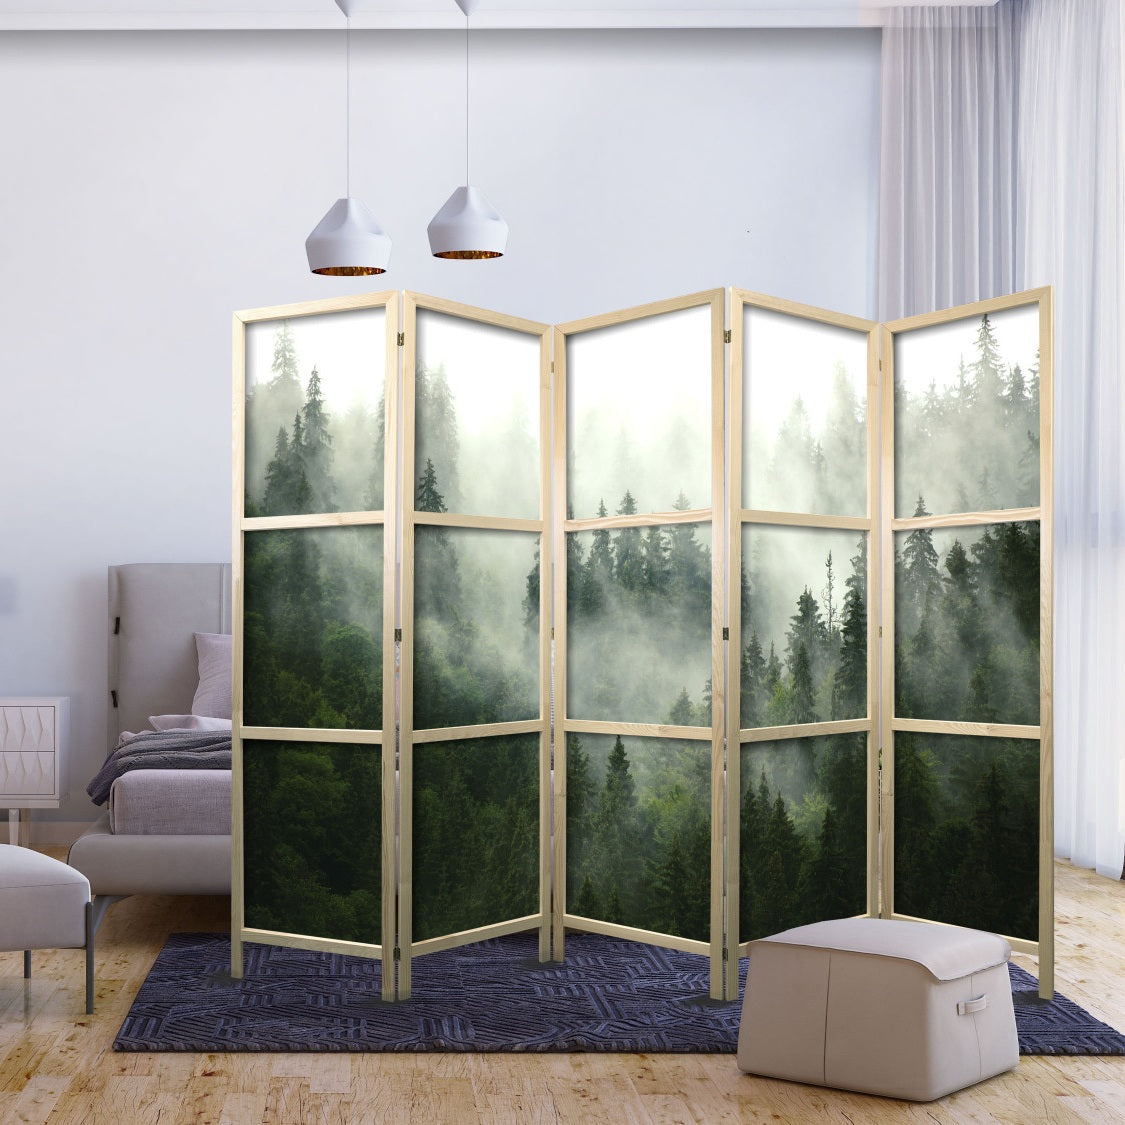 a forest print on the canvas of a shoji screen, this foldable japanese inspired room divider is displayed in a chic and modern interior on top of a purple rug